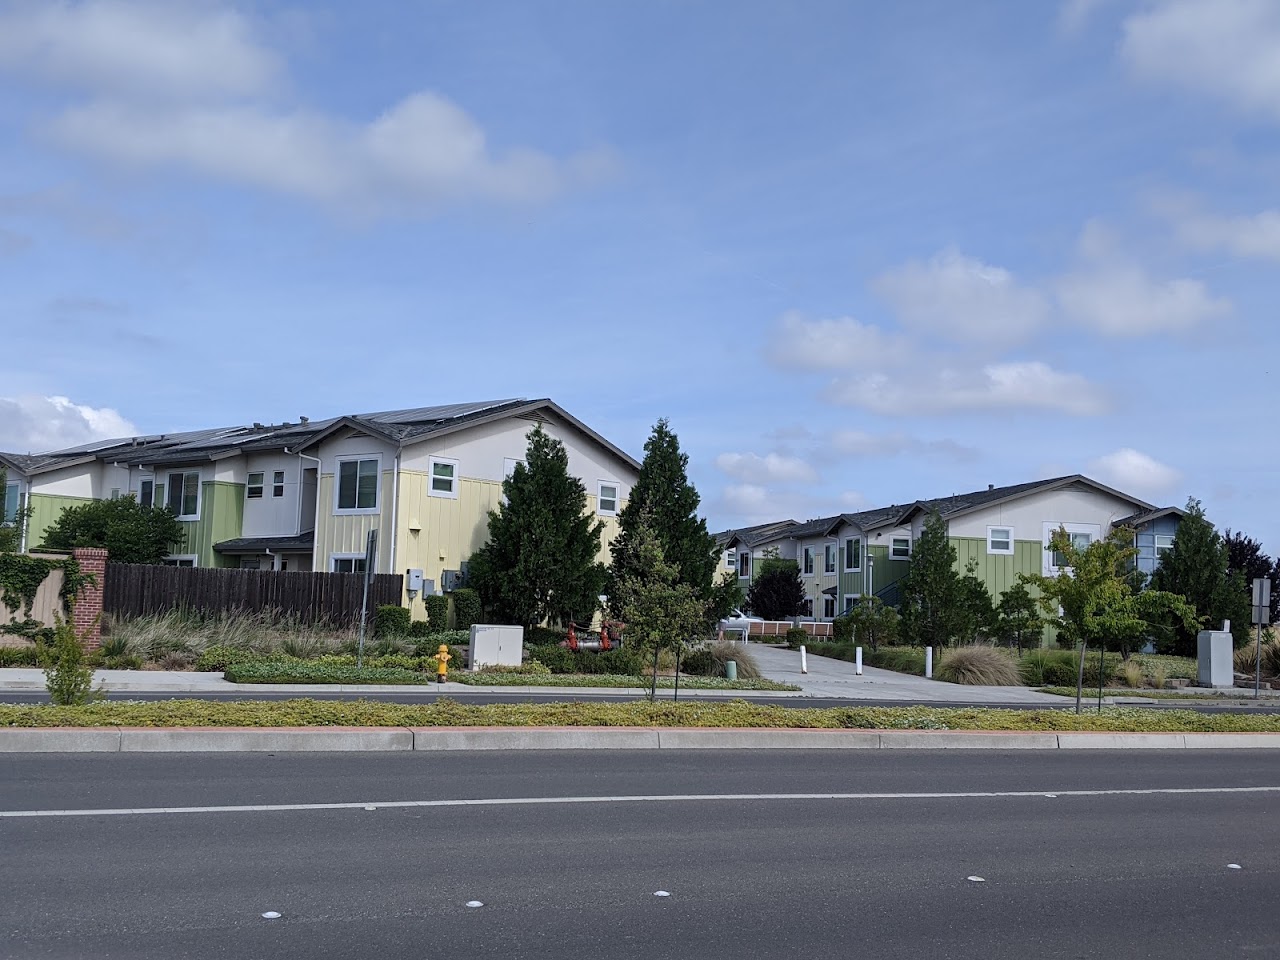 Photo of ROCHDALE GRANGE COMMUNITY. Affordable housing located at 2090 HERITAGE PKWY WOODLAND, CA 95776